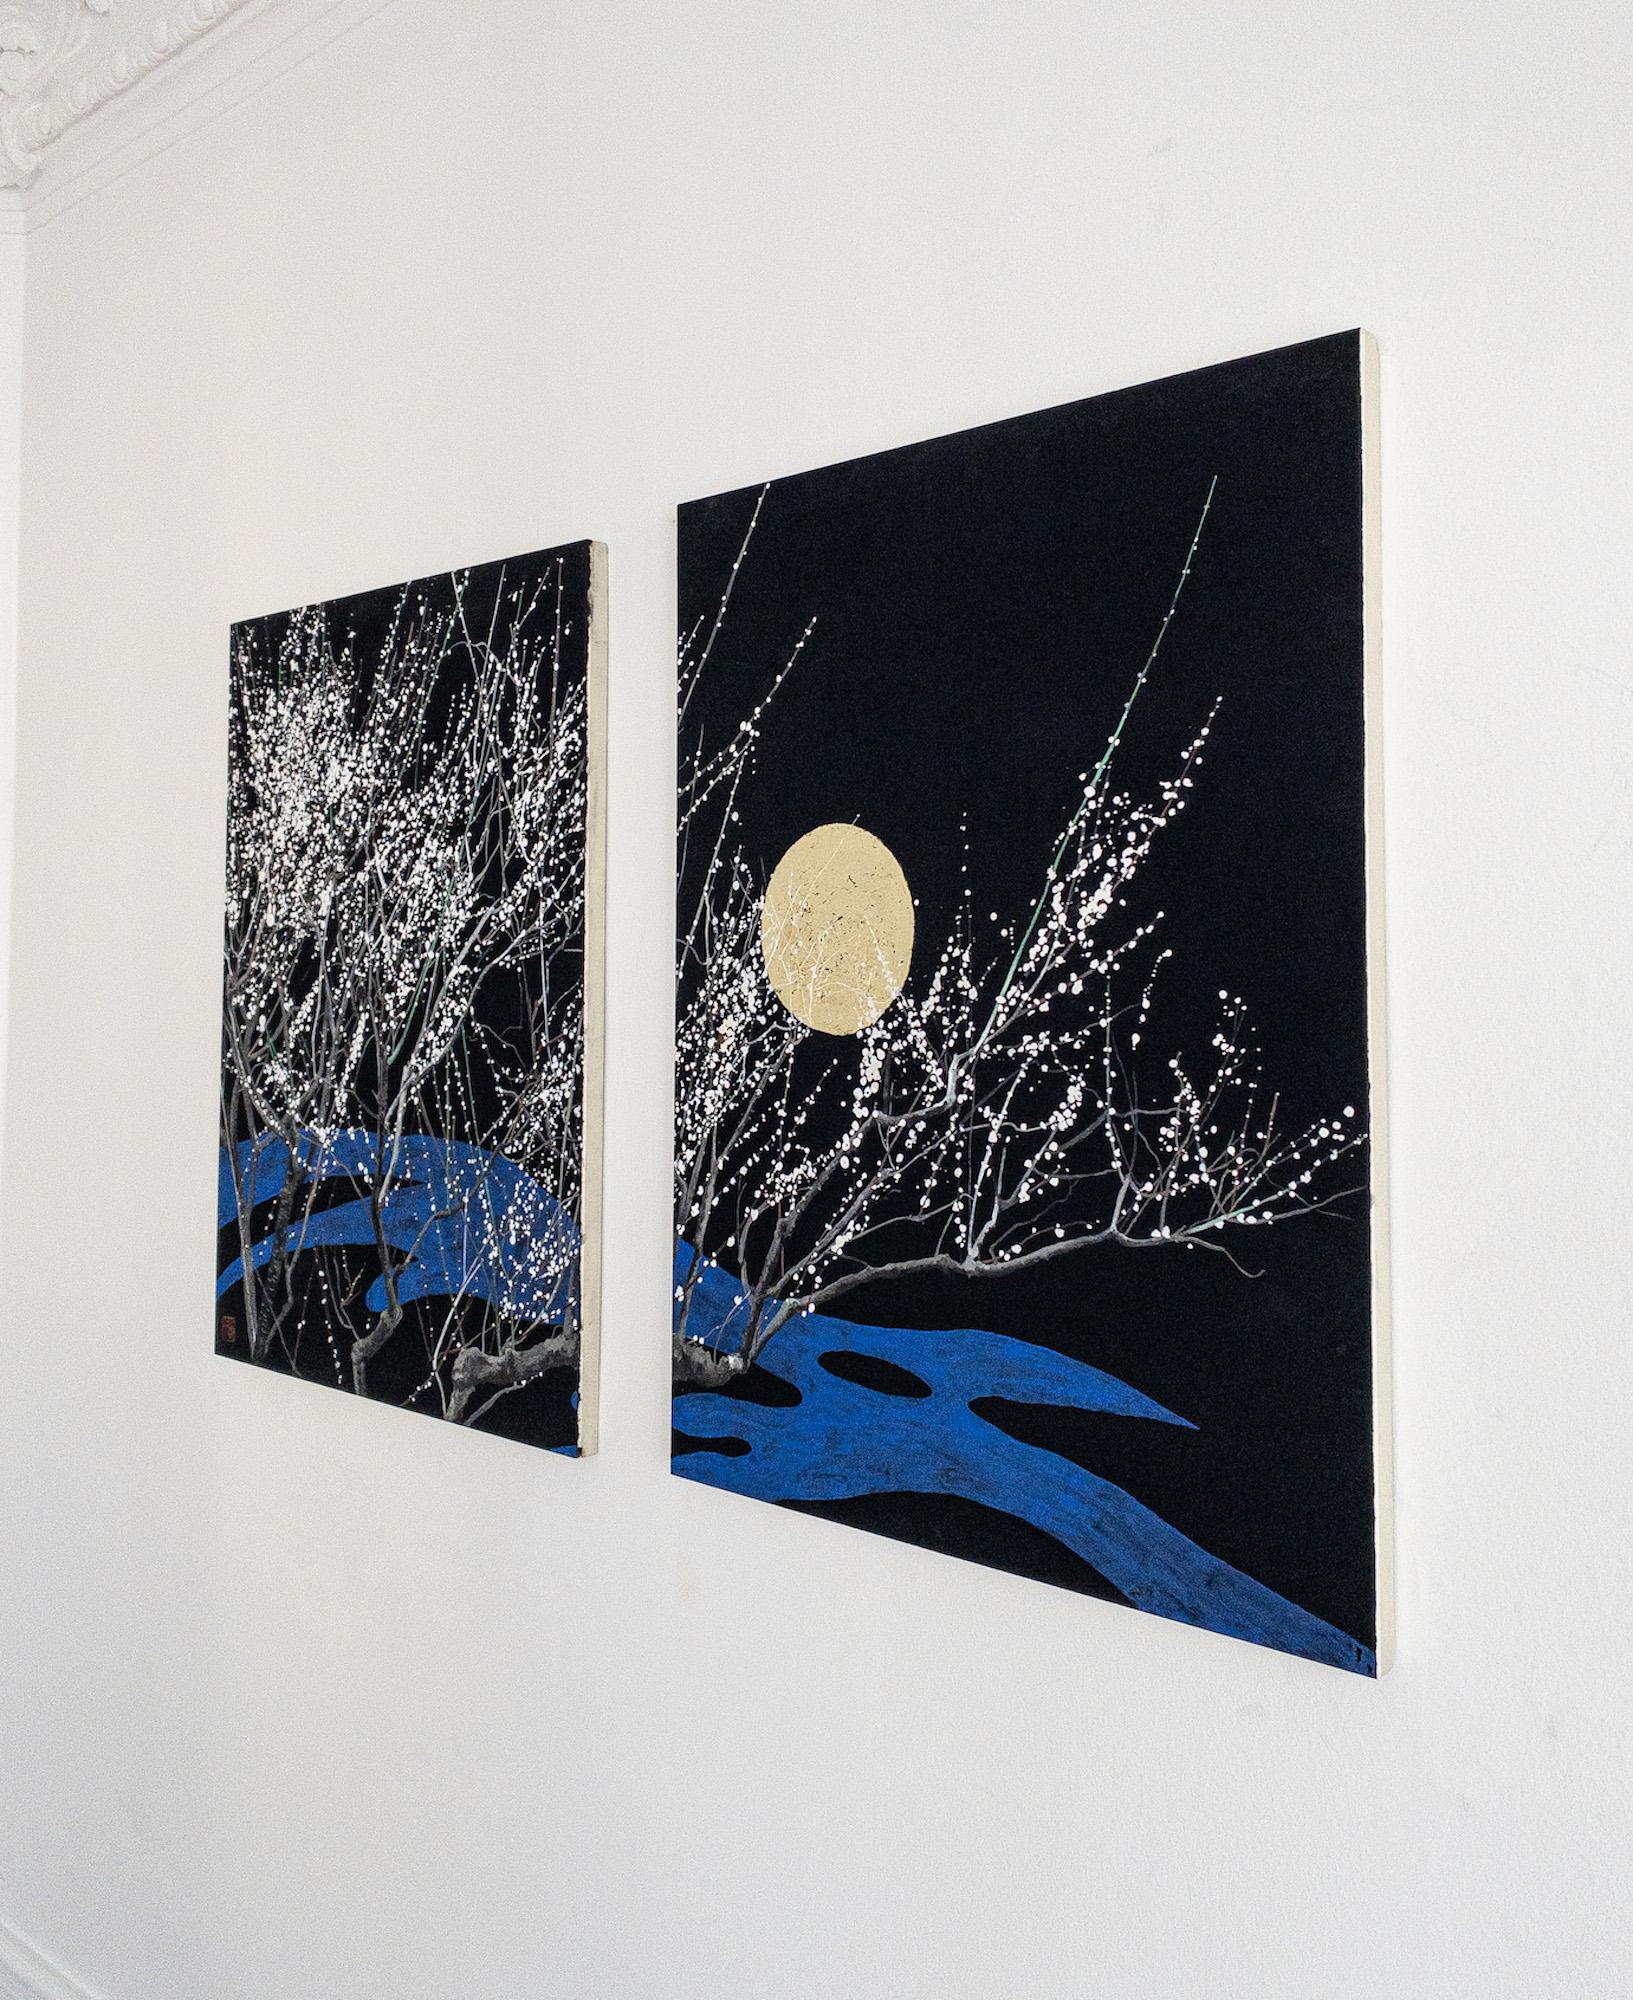 Nocturn IV by Lumi Mizutani - Japanese landscape painting, gold leaf, tree, moon For Sale 3